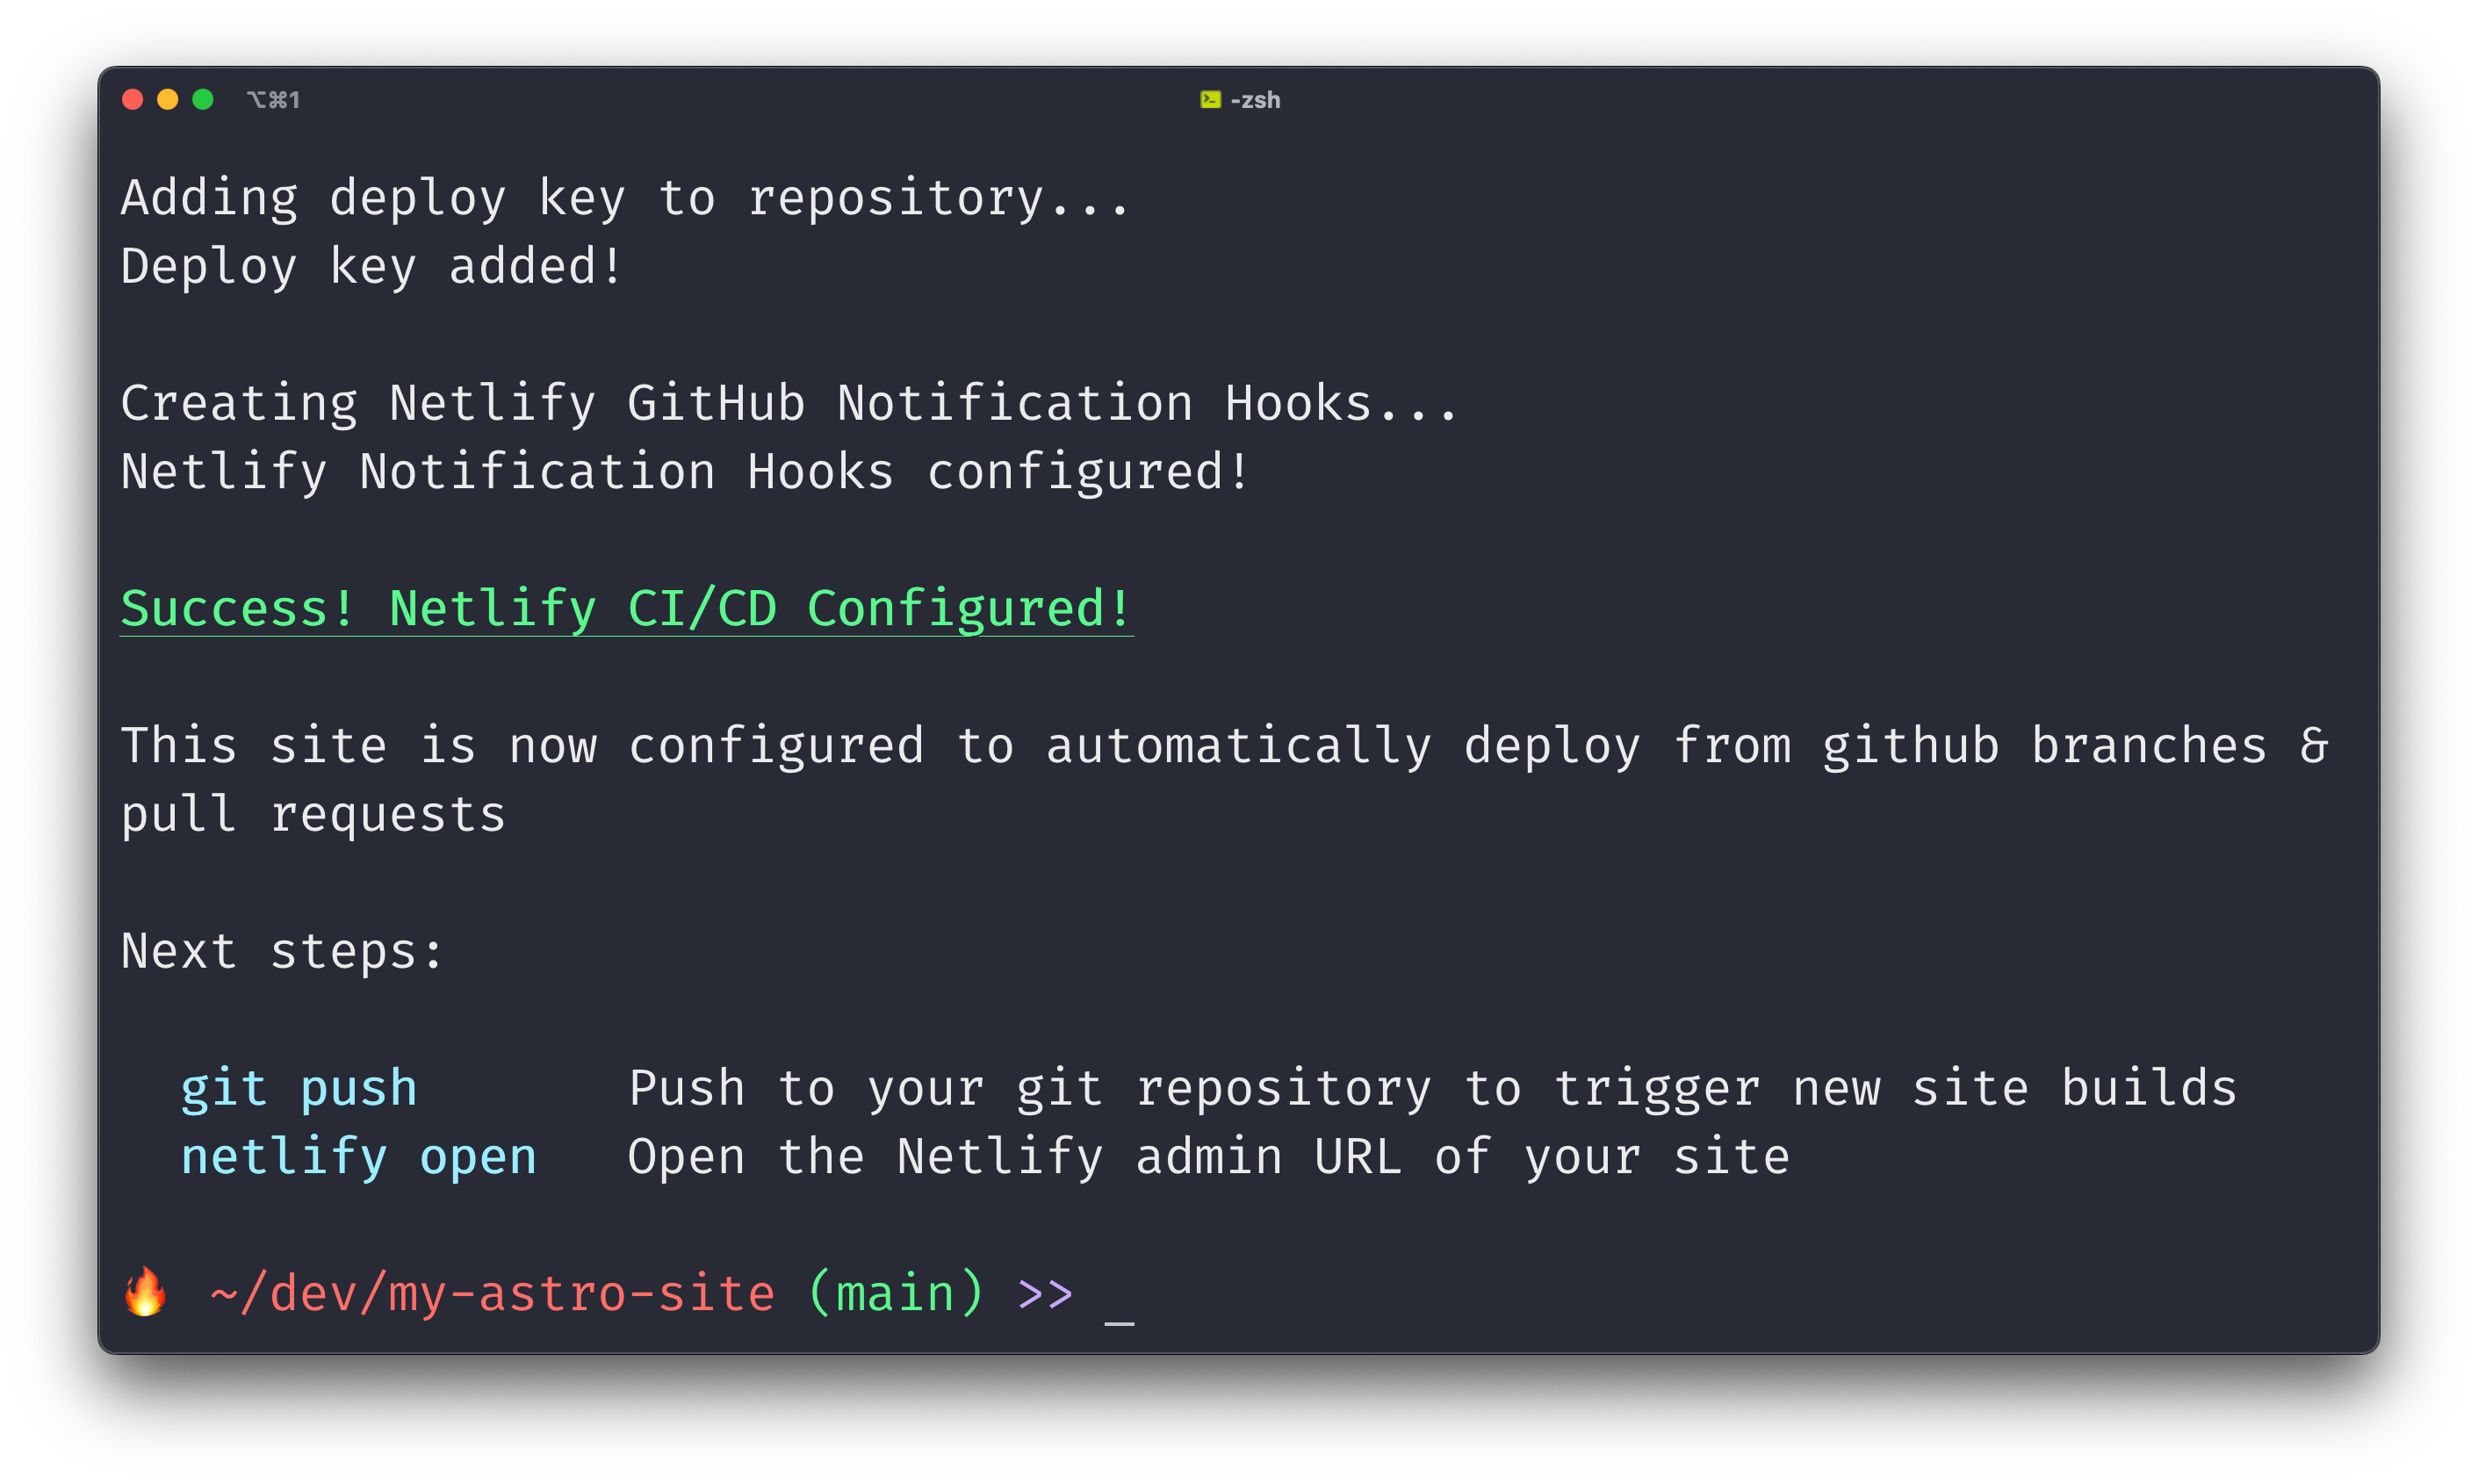 The deploy key has been added to the repository and CI/CD has been configured to automatically deploy from GitHub branches